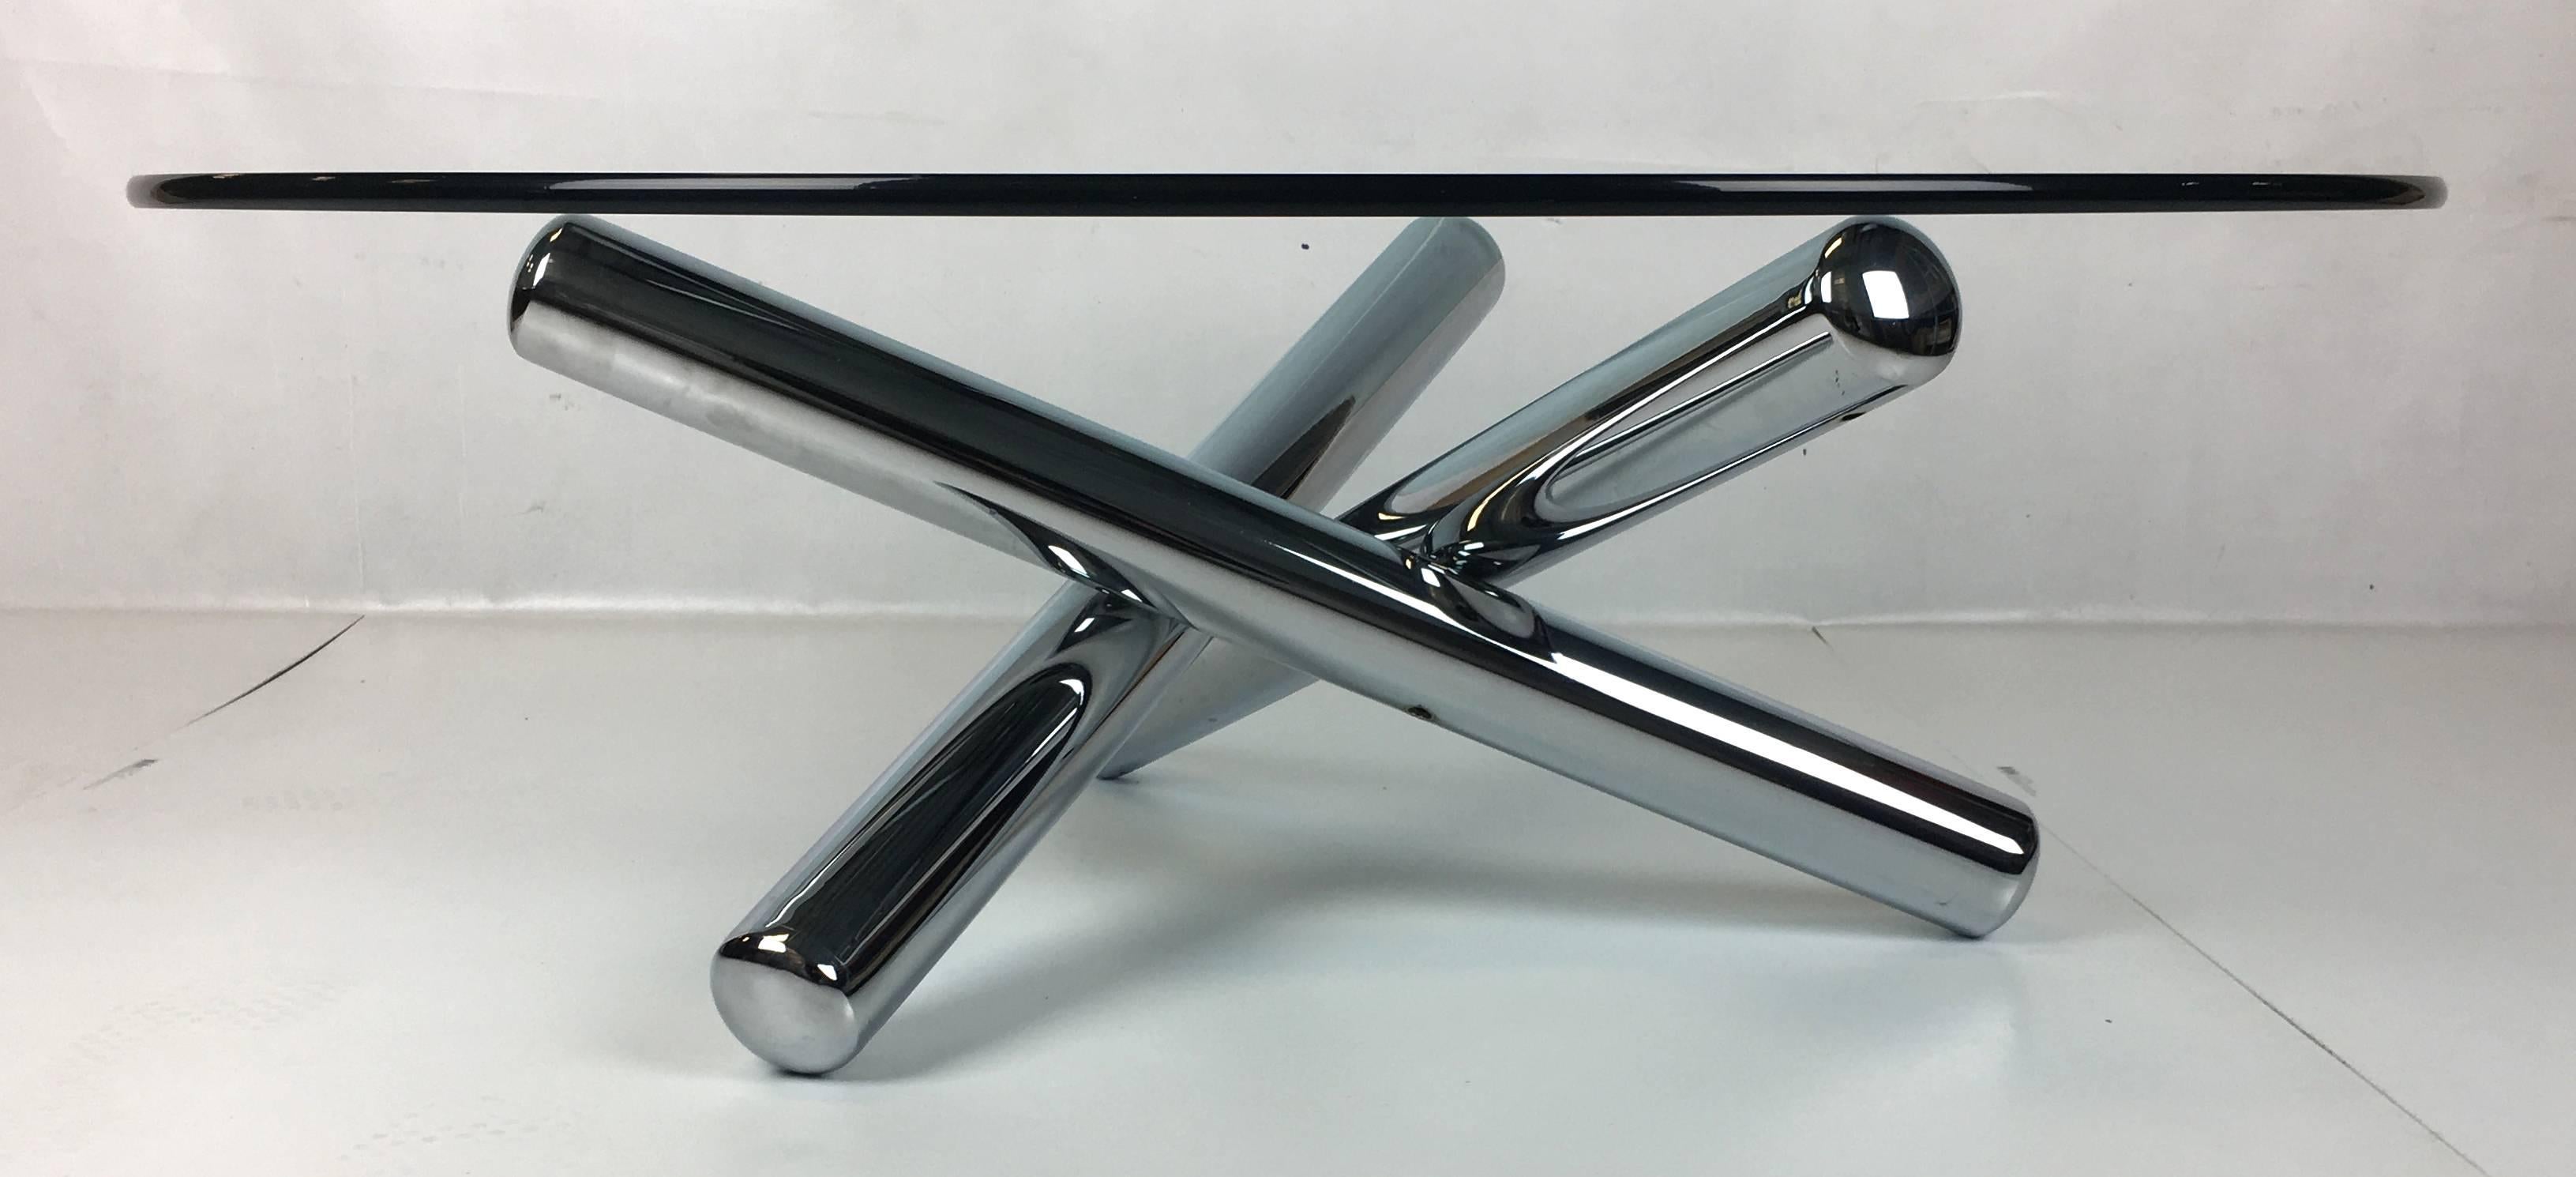 Cool sculptural chrome cocktail table consisting of three "Tubo" style elements, invisibly welded to form a "Jacks" form base for its thick glass top. The plating is in mint condition with no oxidation whatsoever.  Available to